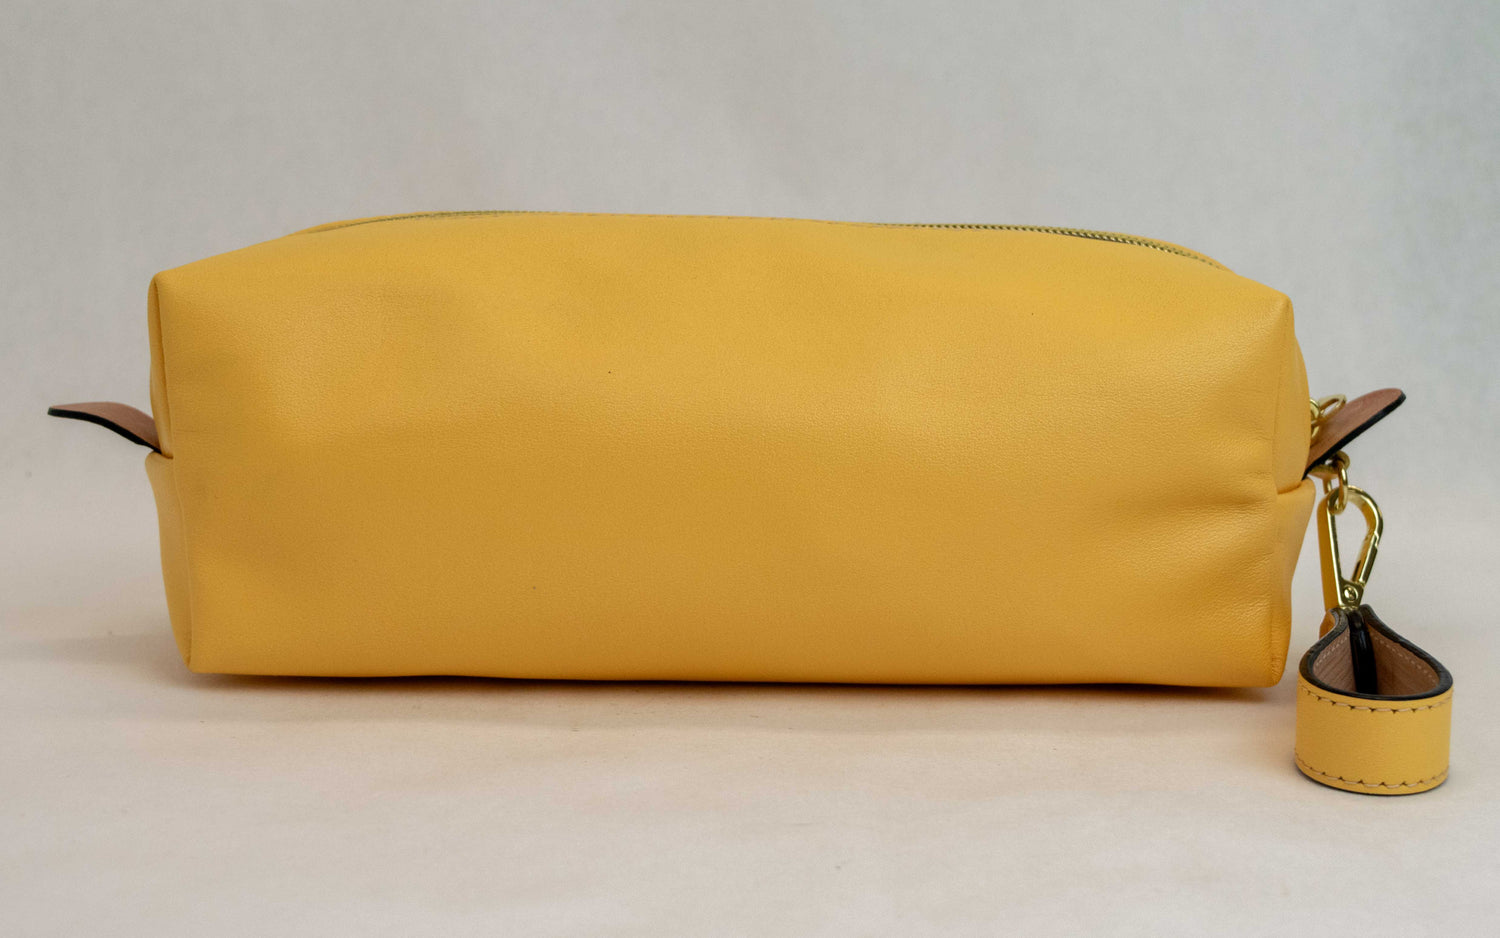 Back view of T5 bath dopp kit toiletry wash bag designer handcrafted of smooth calf leather in saffron yellow.